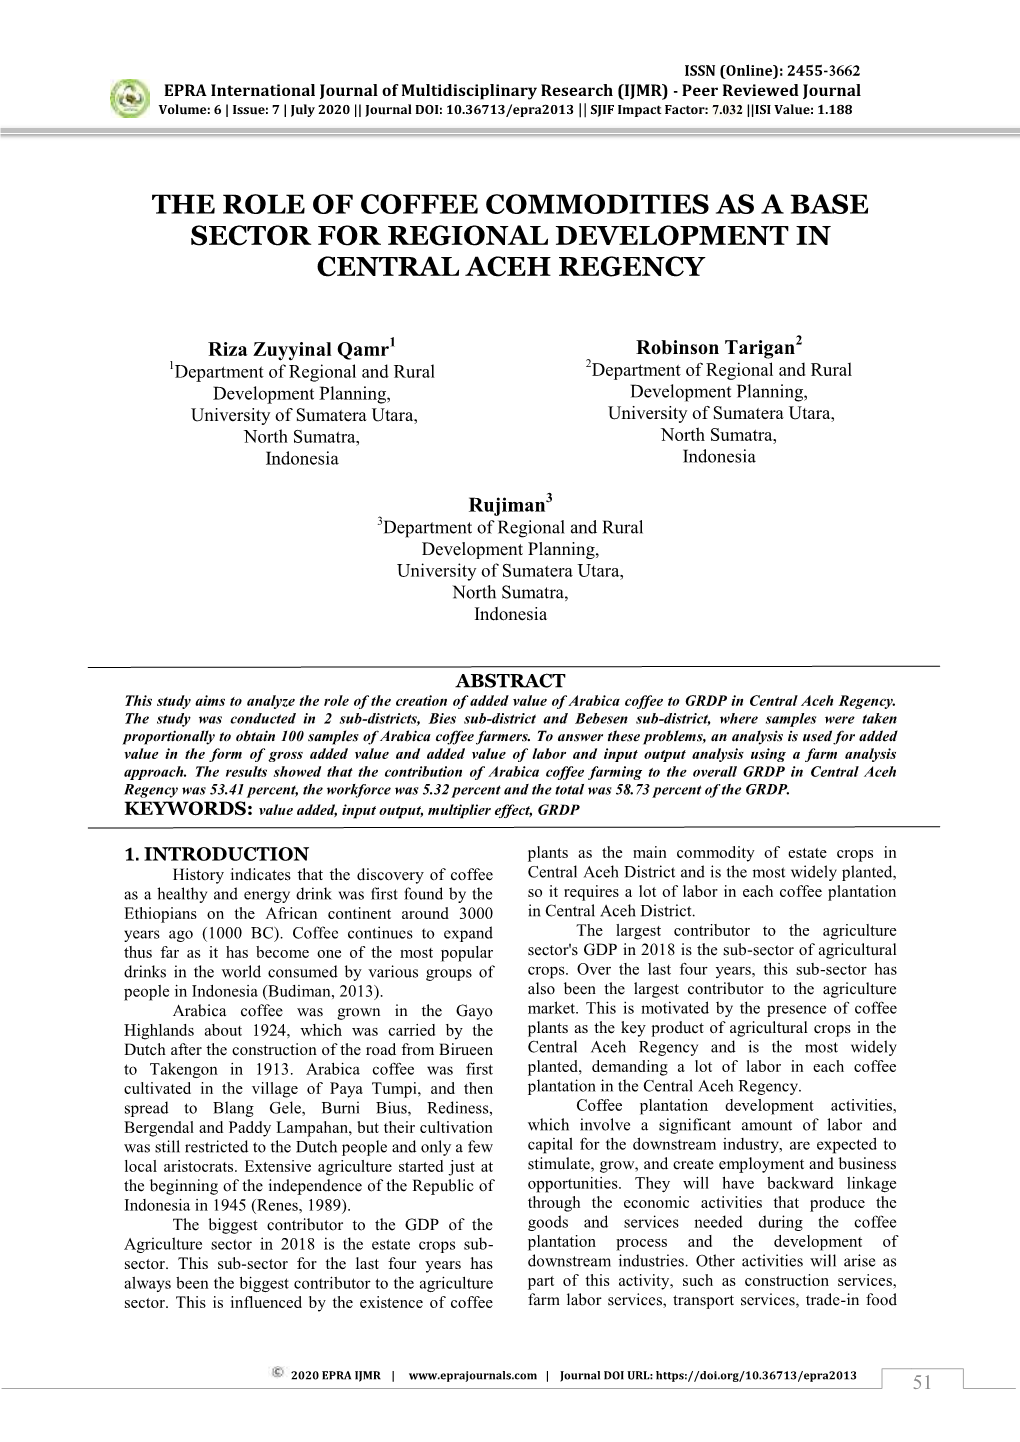 The Role of Coffee Commodities As a Base Sector for Regional Development in Central Aceh Regency